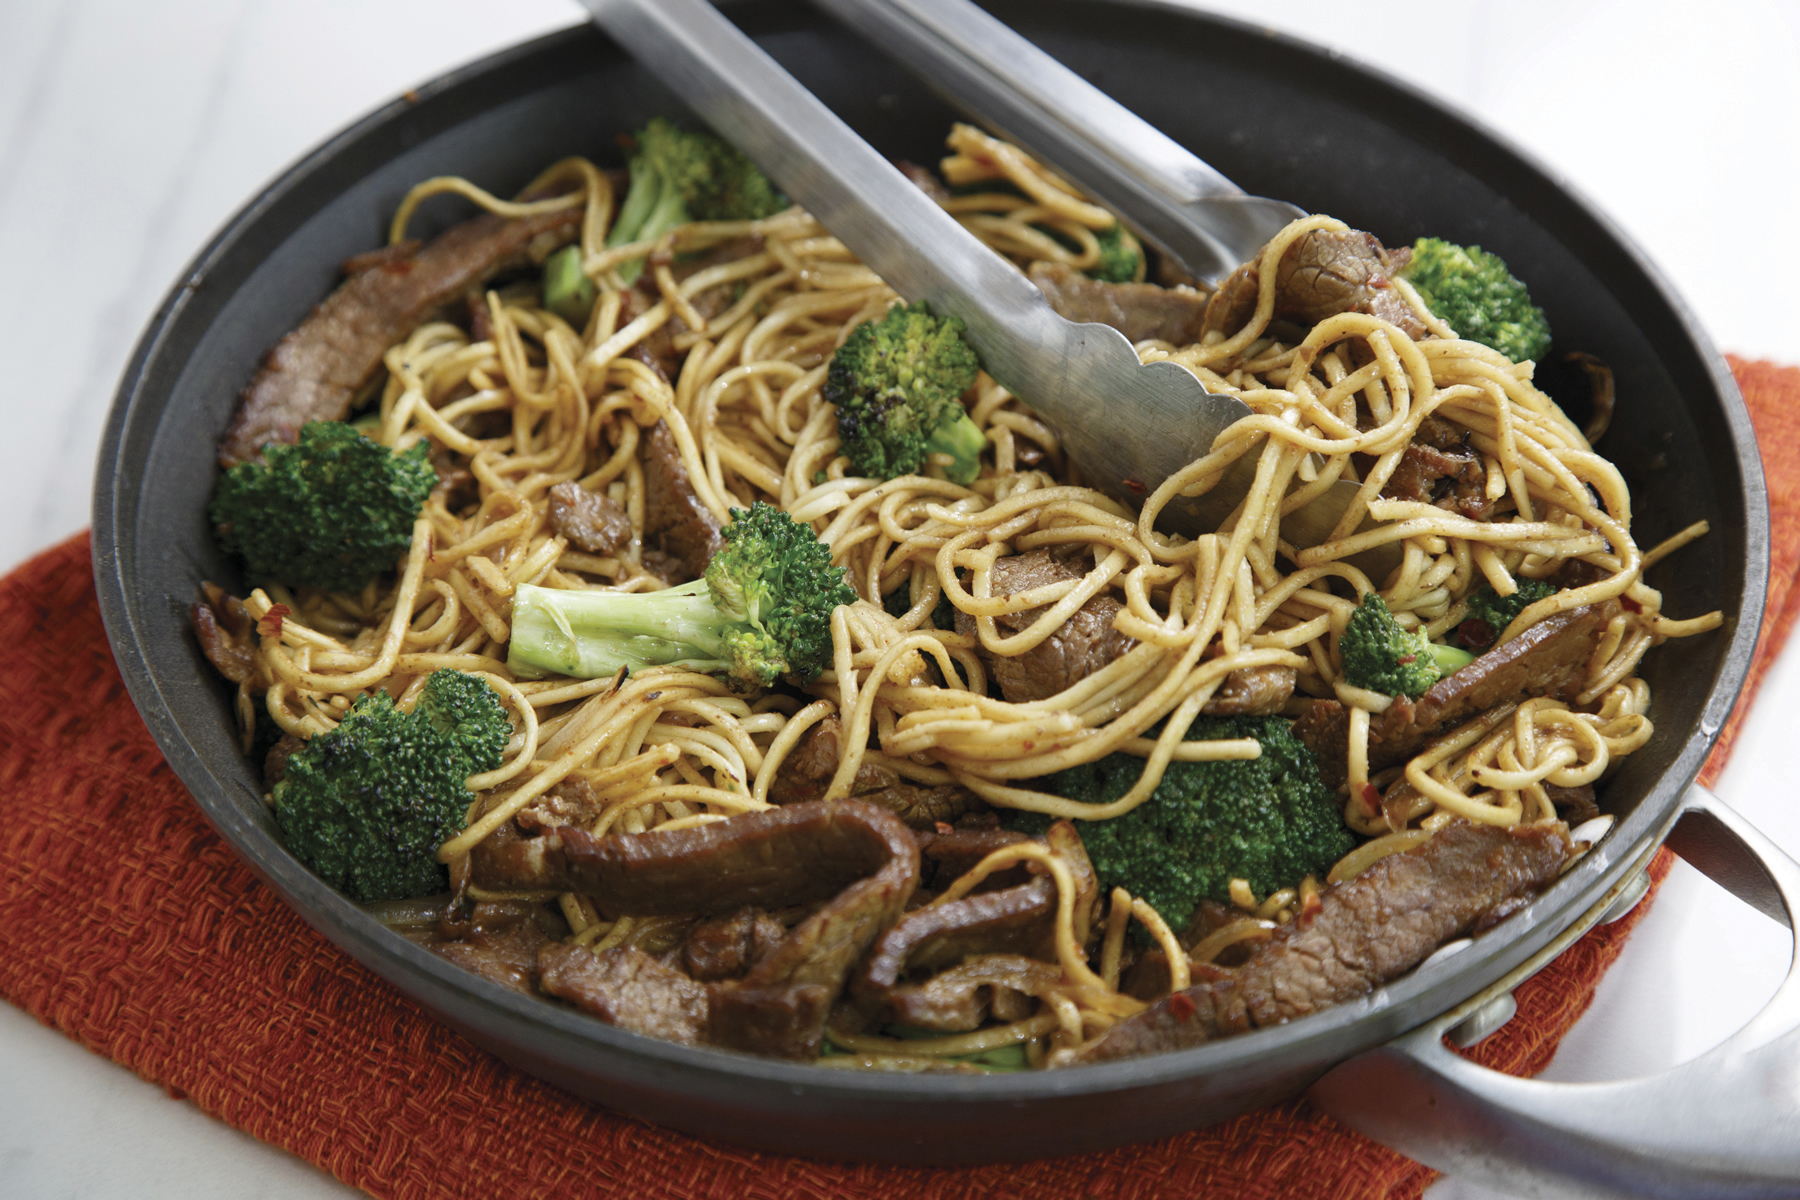 Ginger Beef and Broccoli Stir-Fry